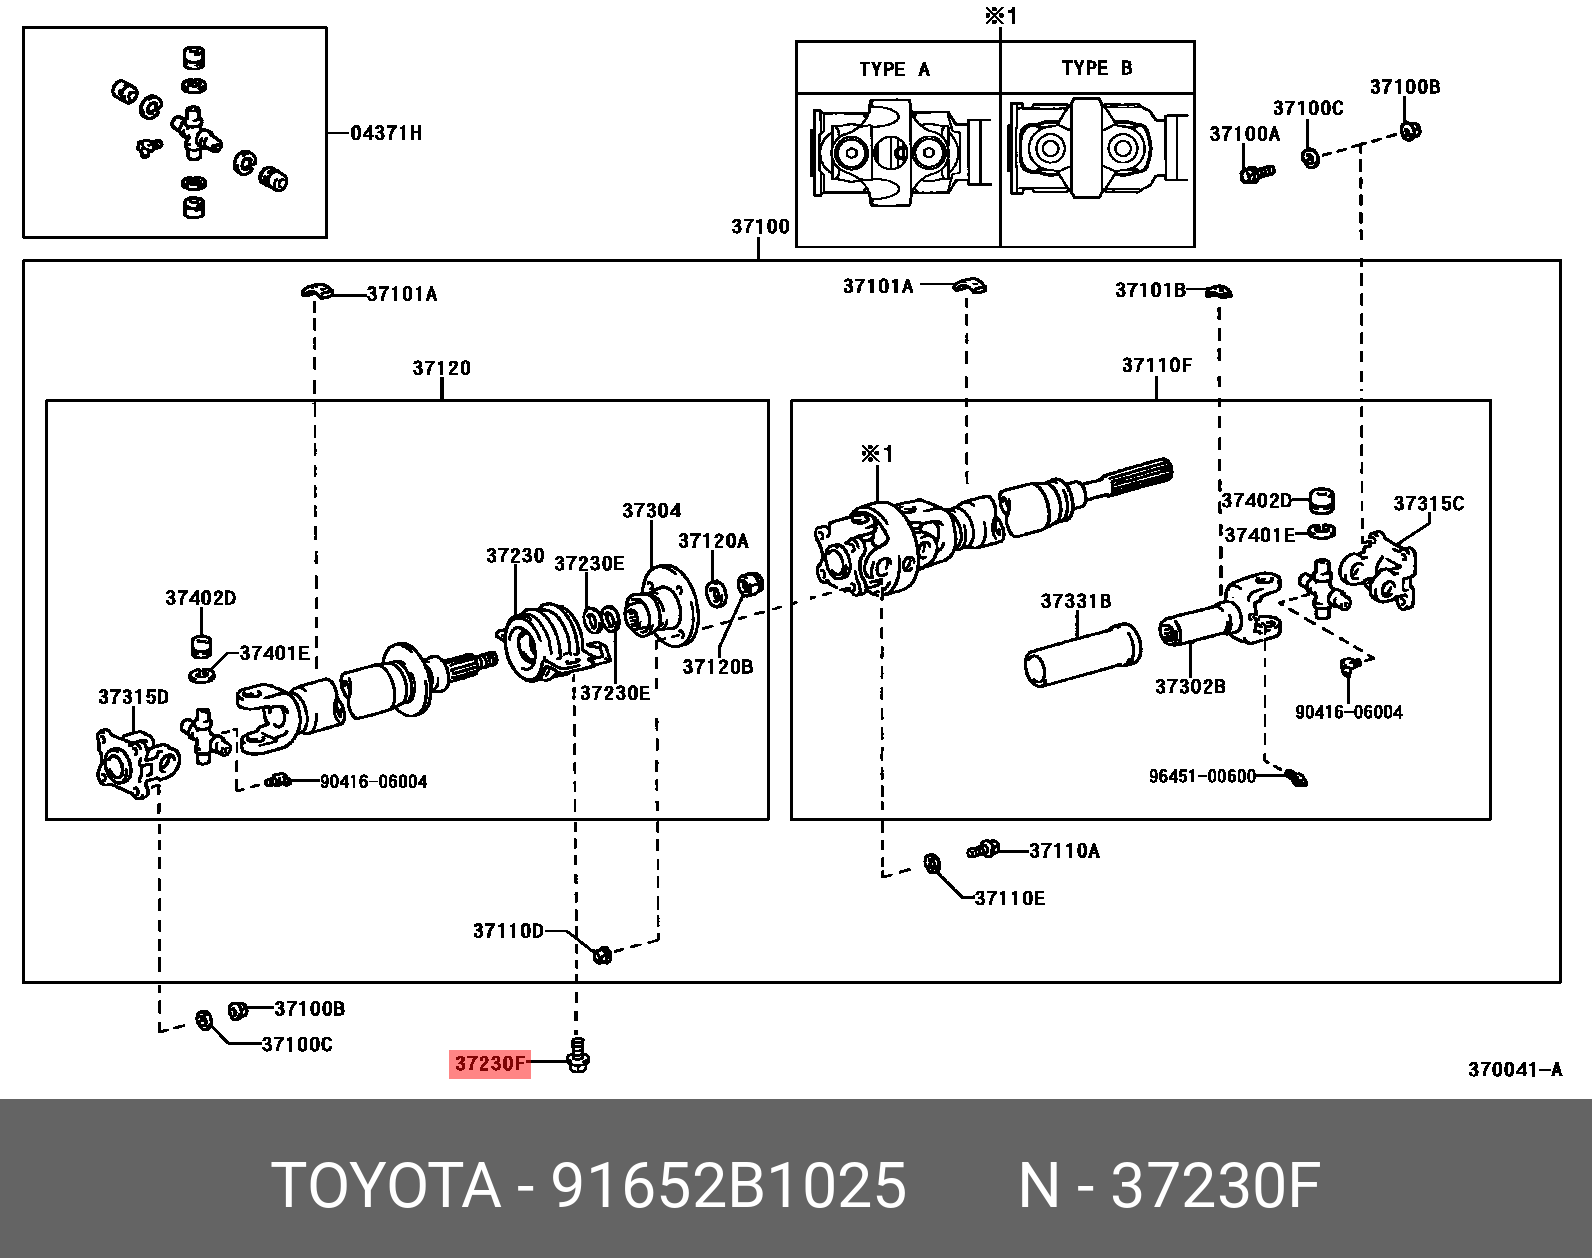 91652B1025, TANK/ ROOMY 201611 -, M900A, M910A, BOLT, NO.1 (FOR CENTER SUPPORT BEARING)